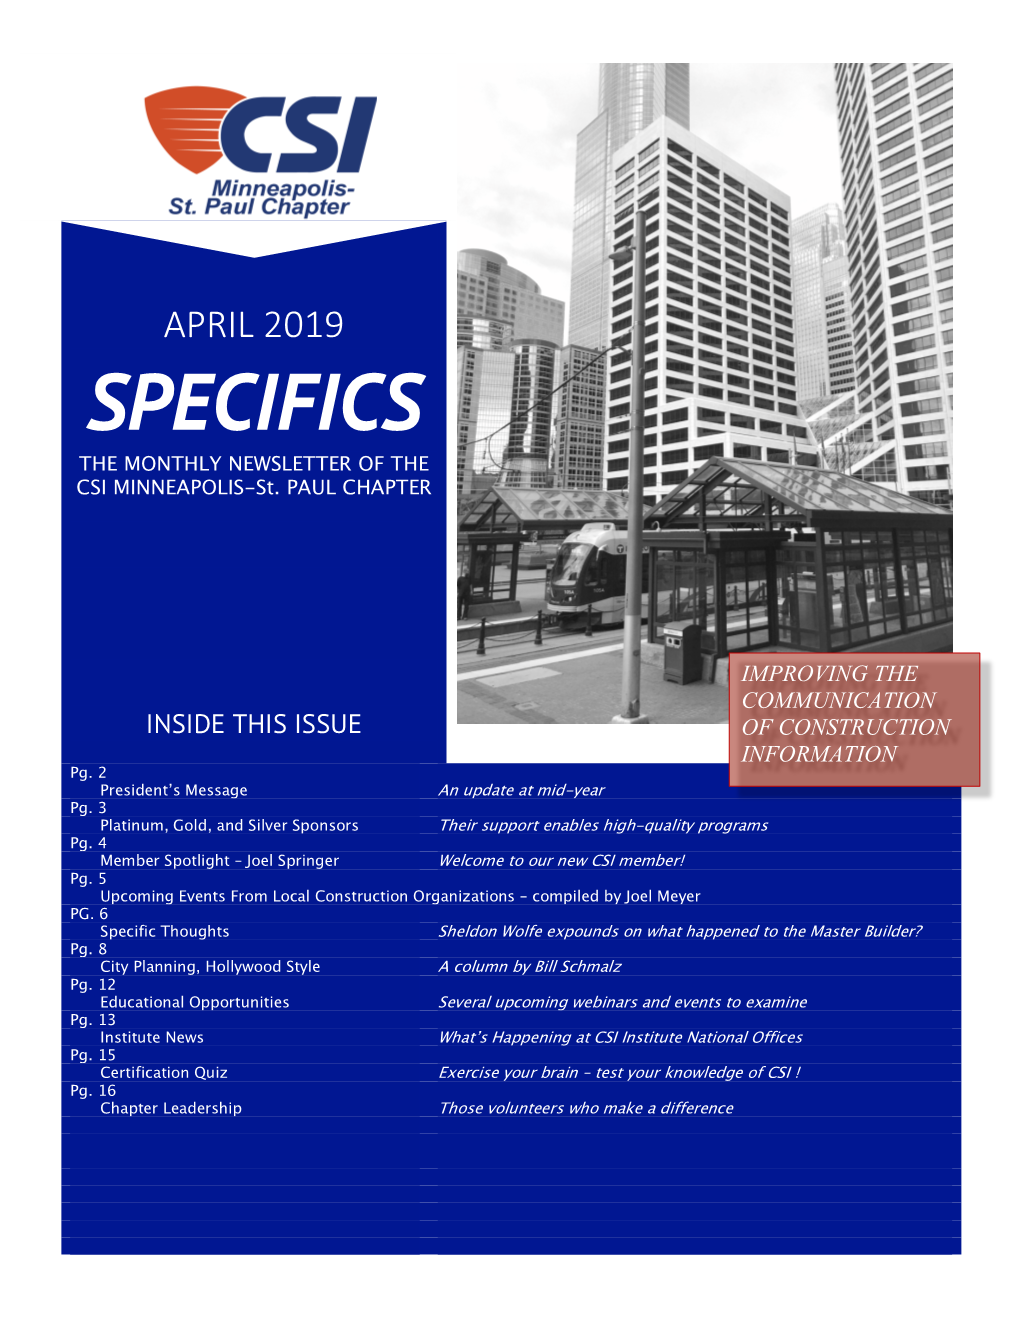 SPECIFICS the MONTHLY NEWSLETTER of the CSI MINNEAPOLIS-St